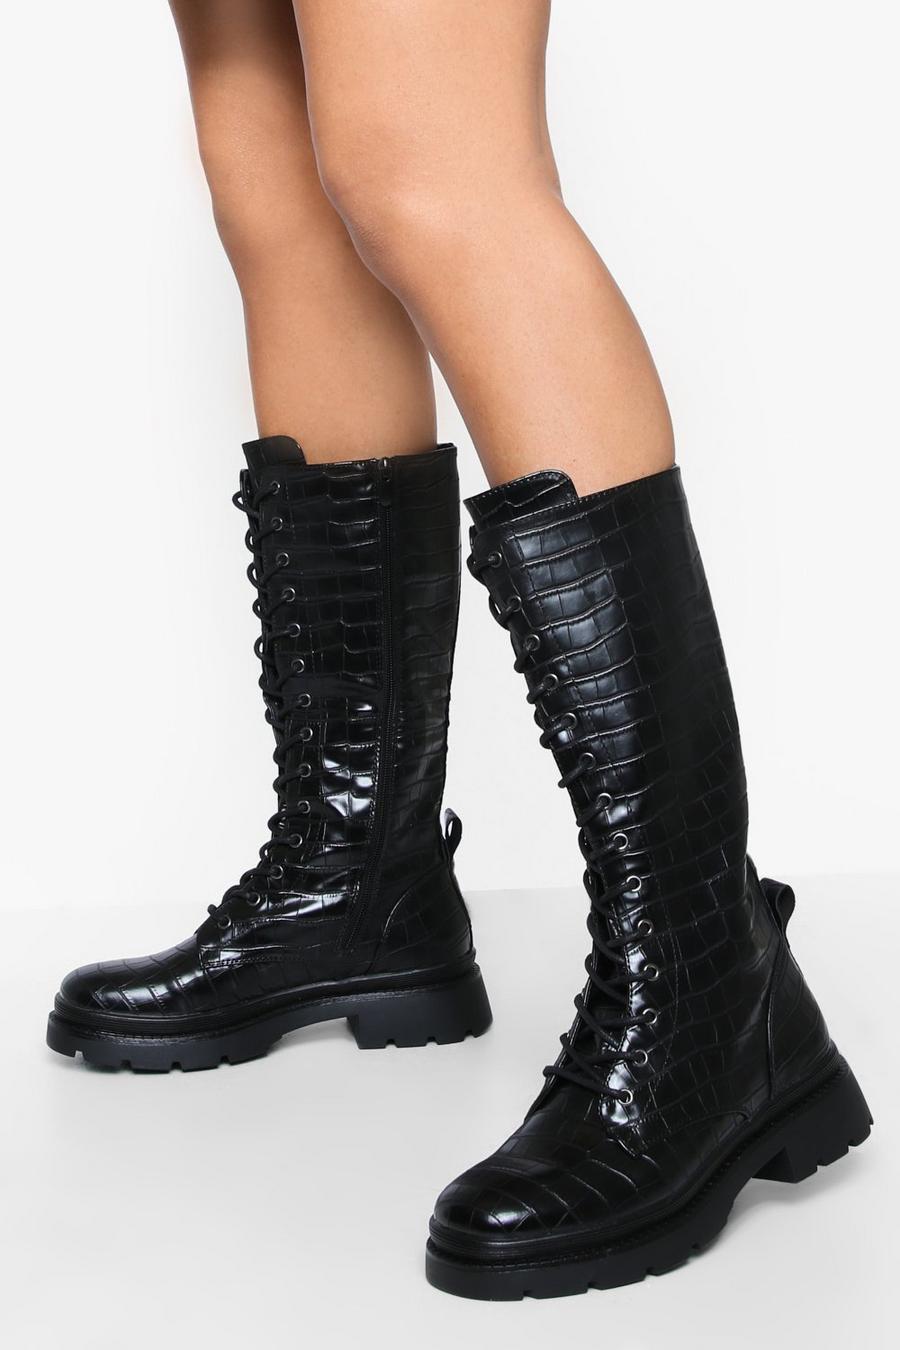 Black Lace Up Detail Calf High Boots